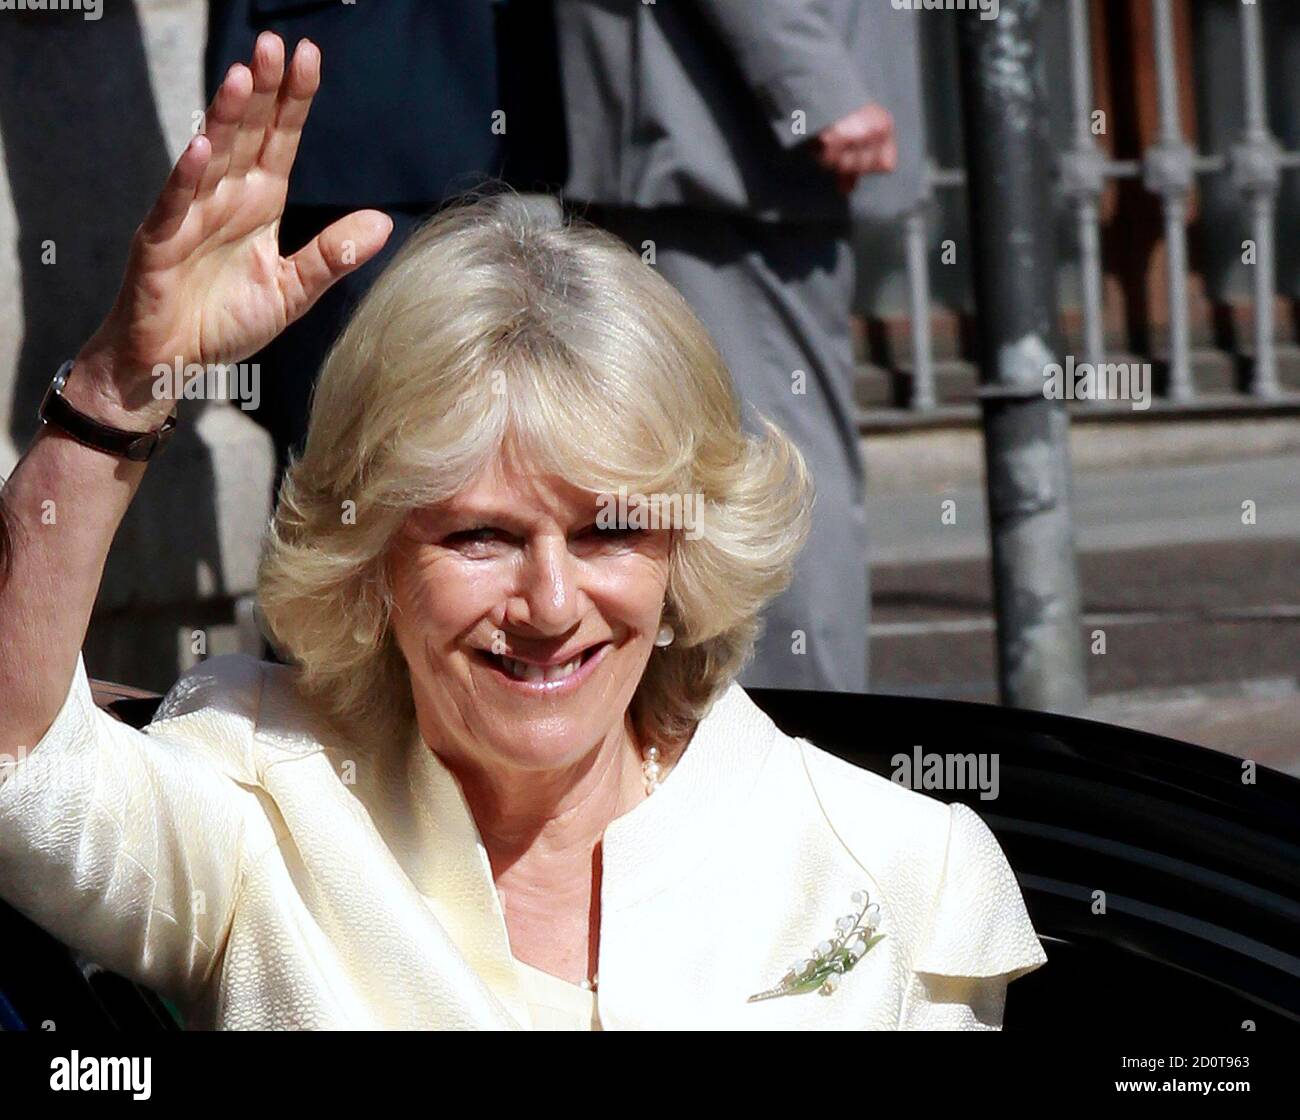 britains-camilla-duchess-of-cornwall-waves-to-reporters-before-leaving-madrids-town-hall-march-31-2011-prince-charles-and-his-wife-camilla-the-duchess-of-cornwall-arrived-in-spain-on-an-official-visit-reutersandrea-comas-spain-tags-politics-royals-2D0T963.jpg